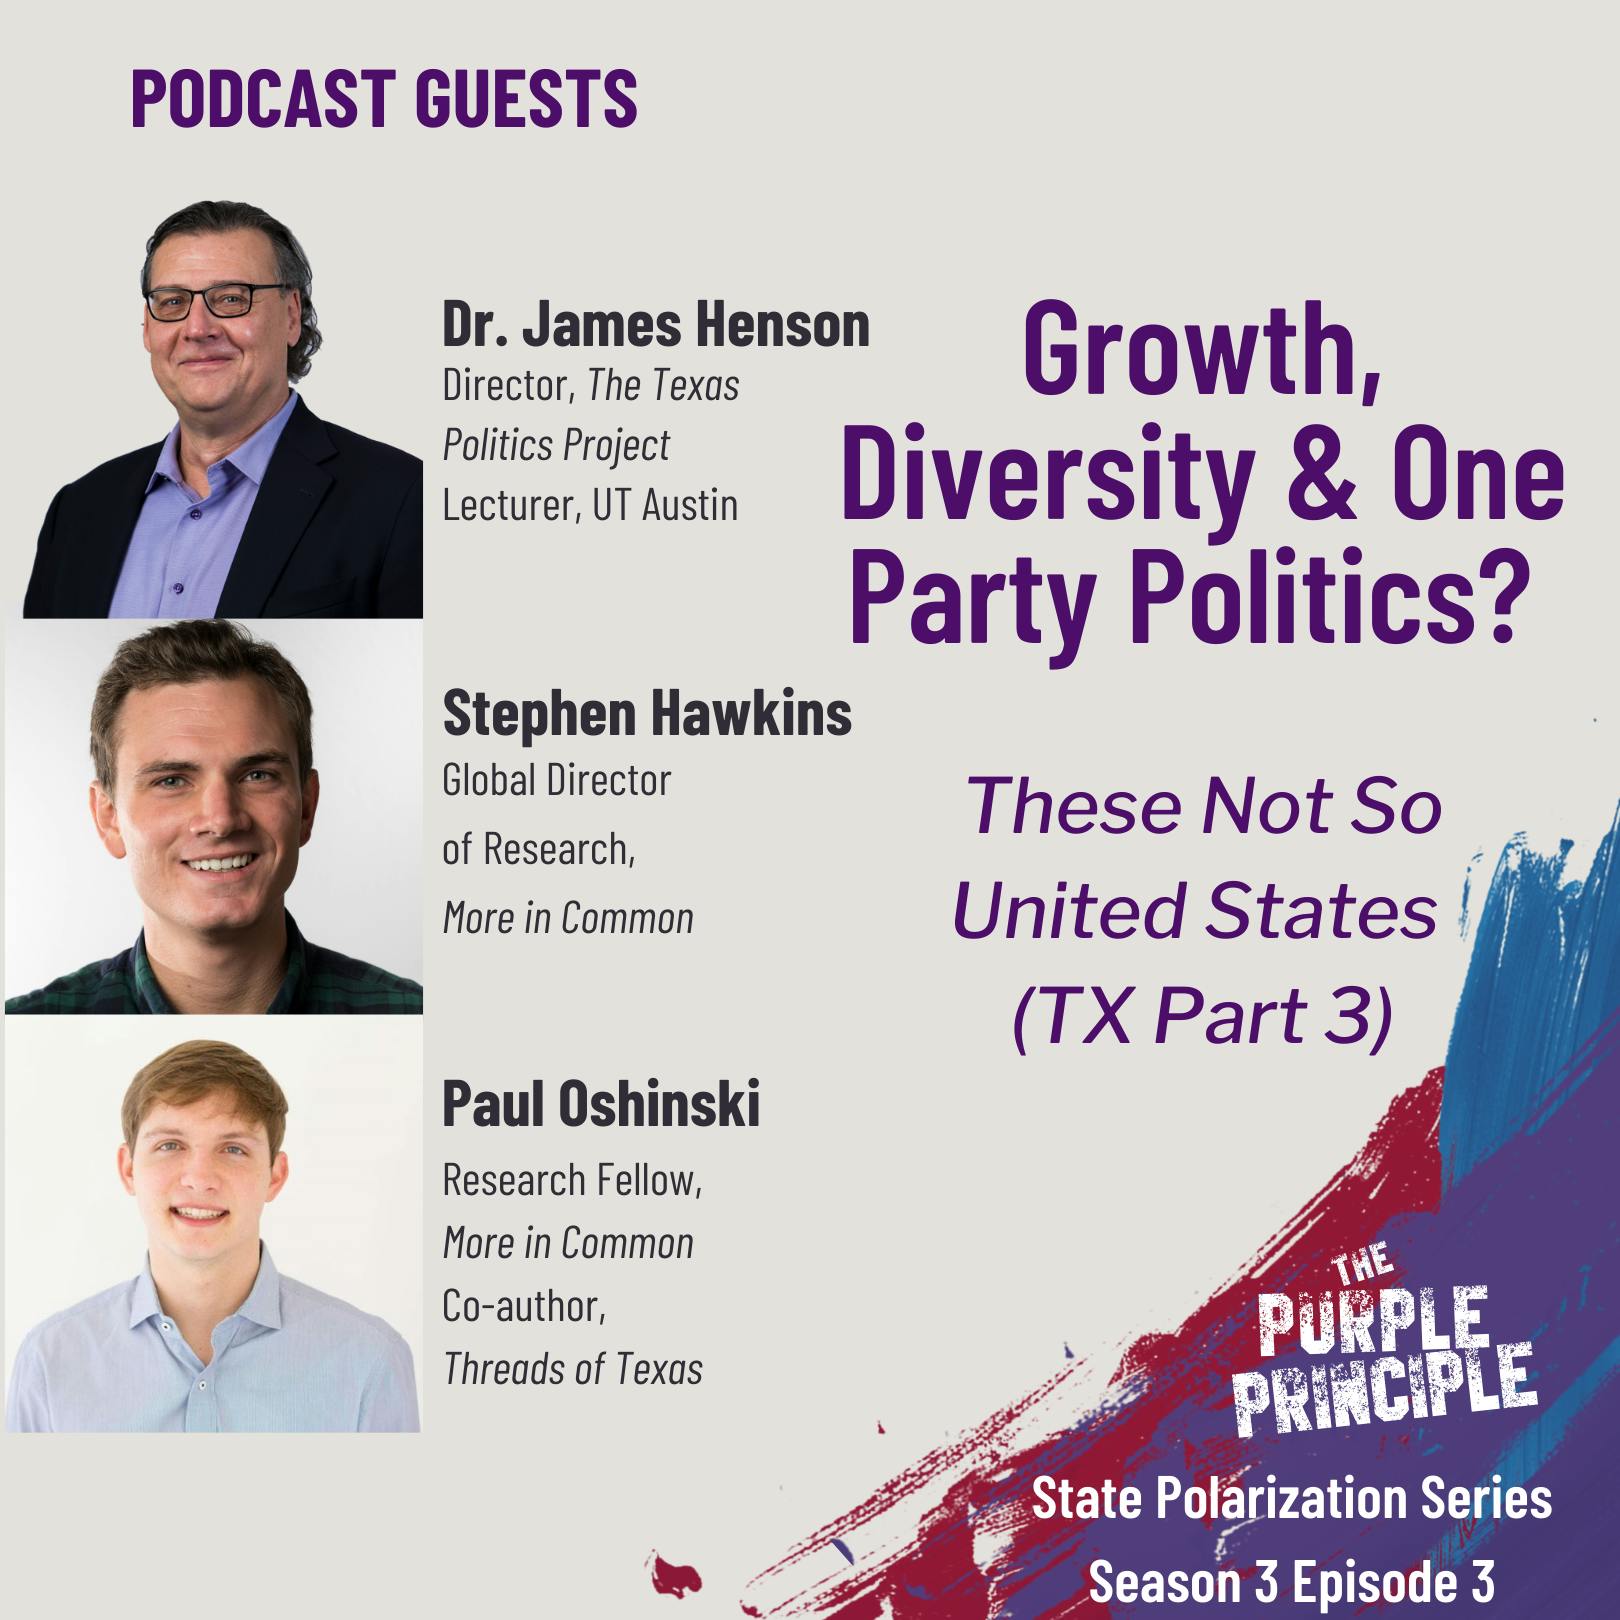 Growth, Diversity & One Party Politics? These Not So United States (TX Part 3)